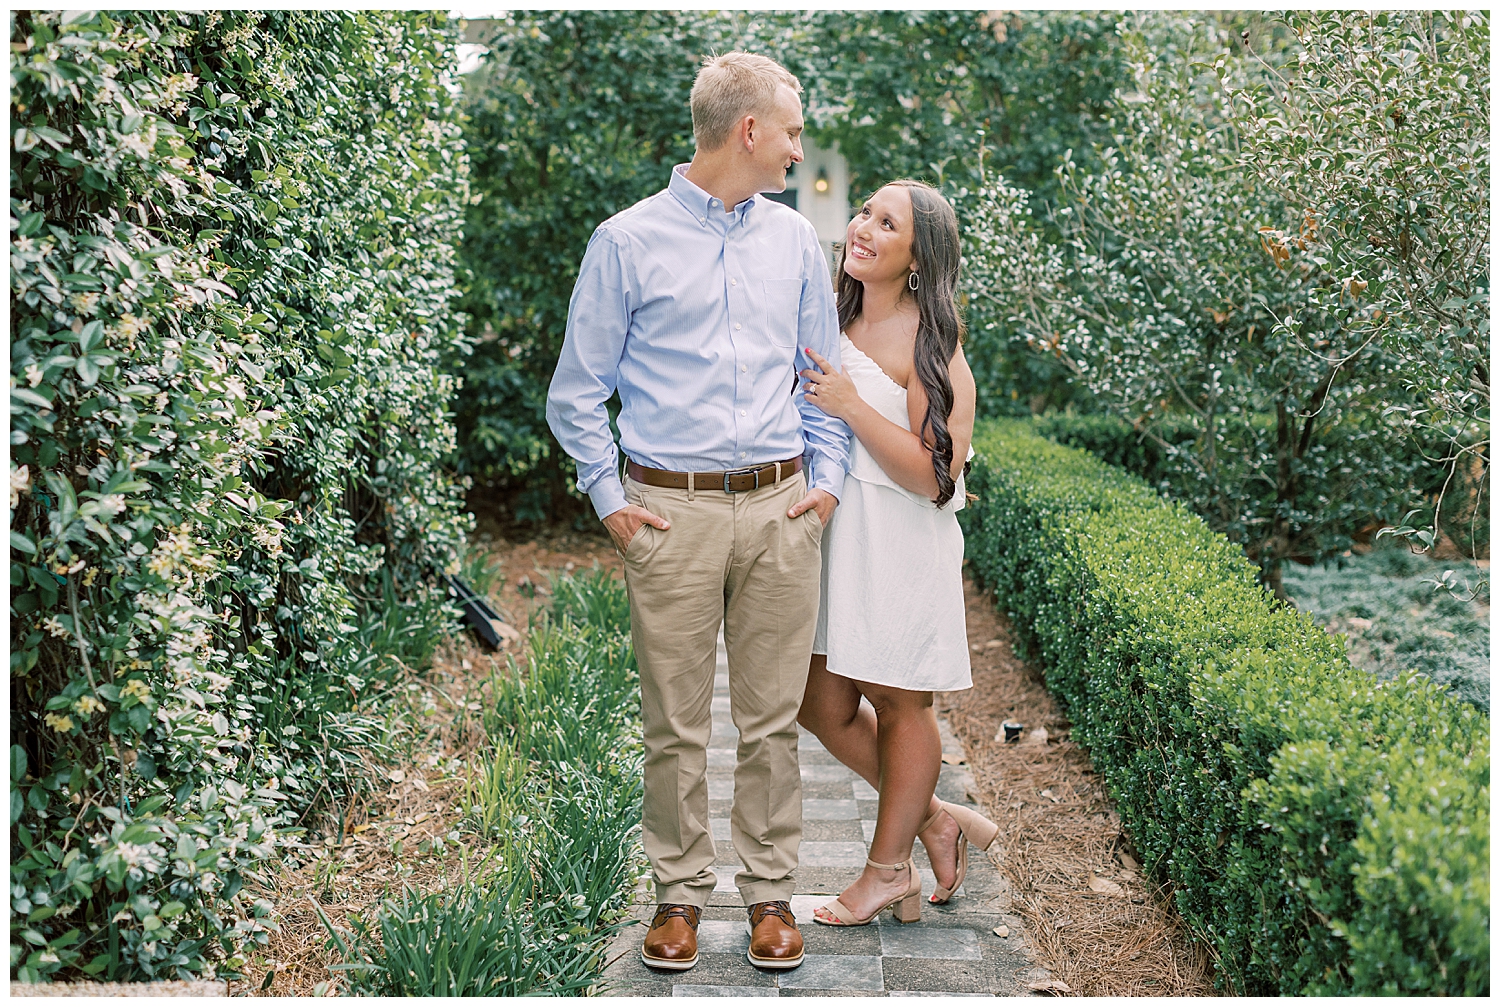 Juliann Riggs Photography captures a Hattiesburg engagement session.